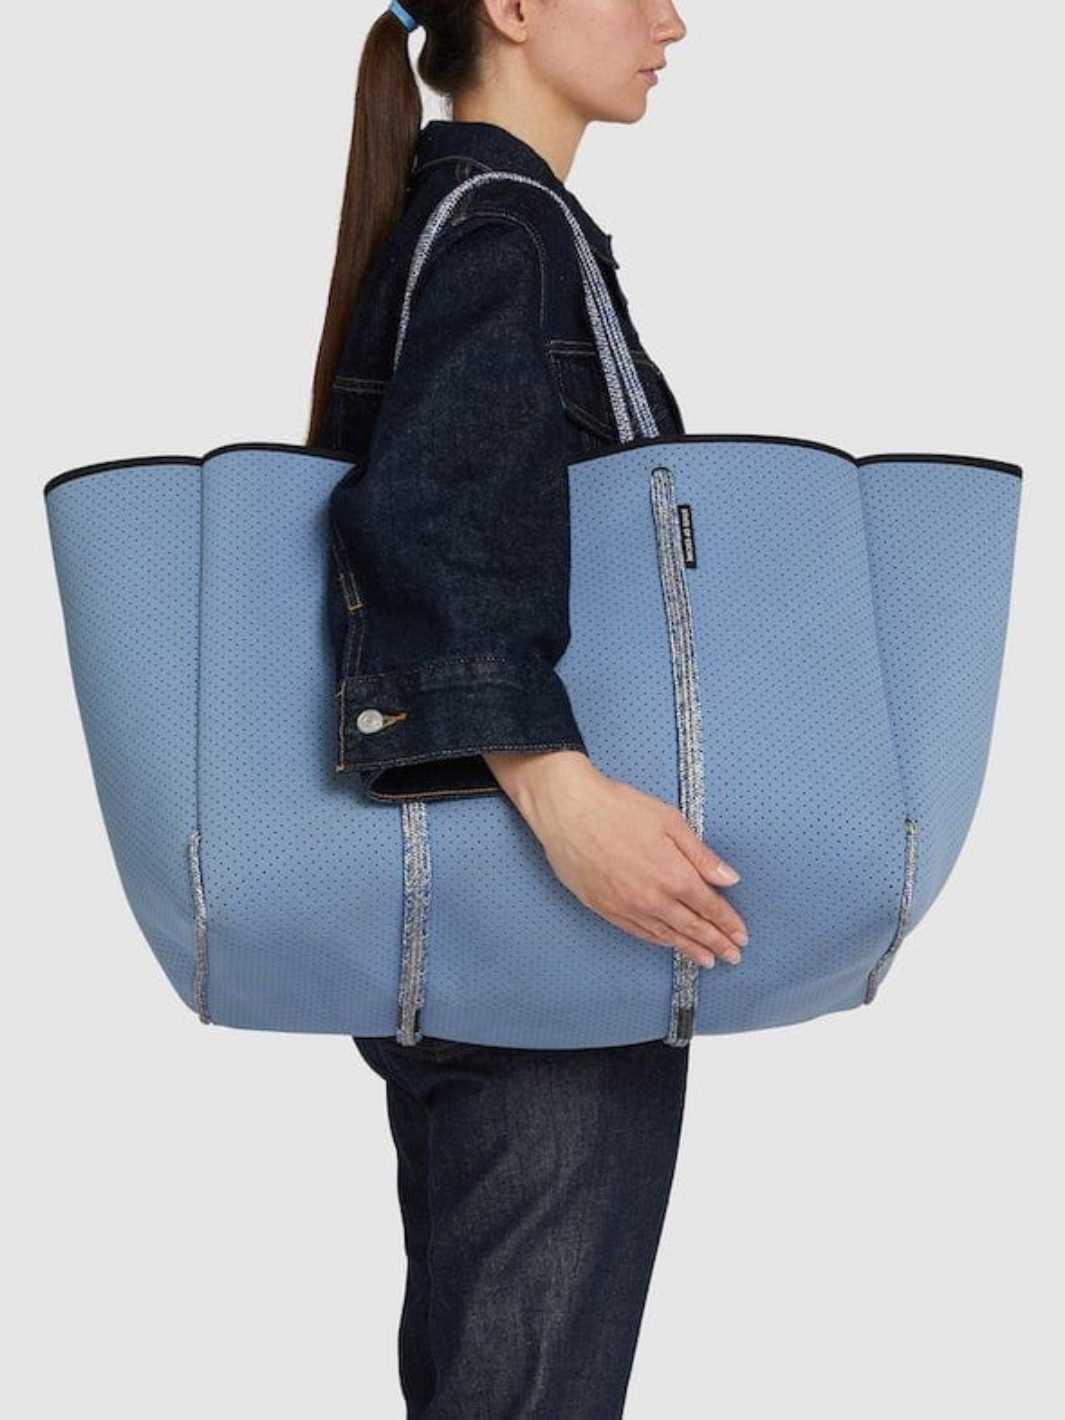 State of Escape Bags Tote Bag | Odyssey Tote Washed Lapis